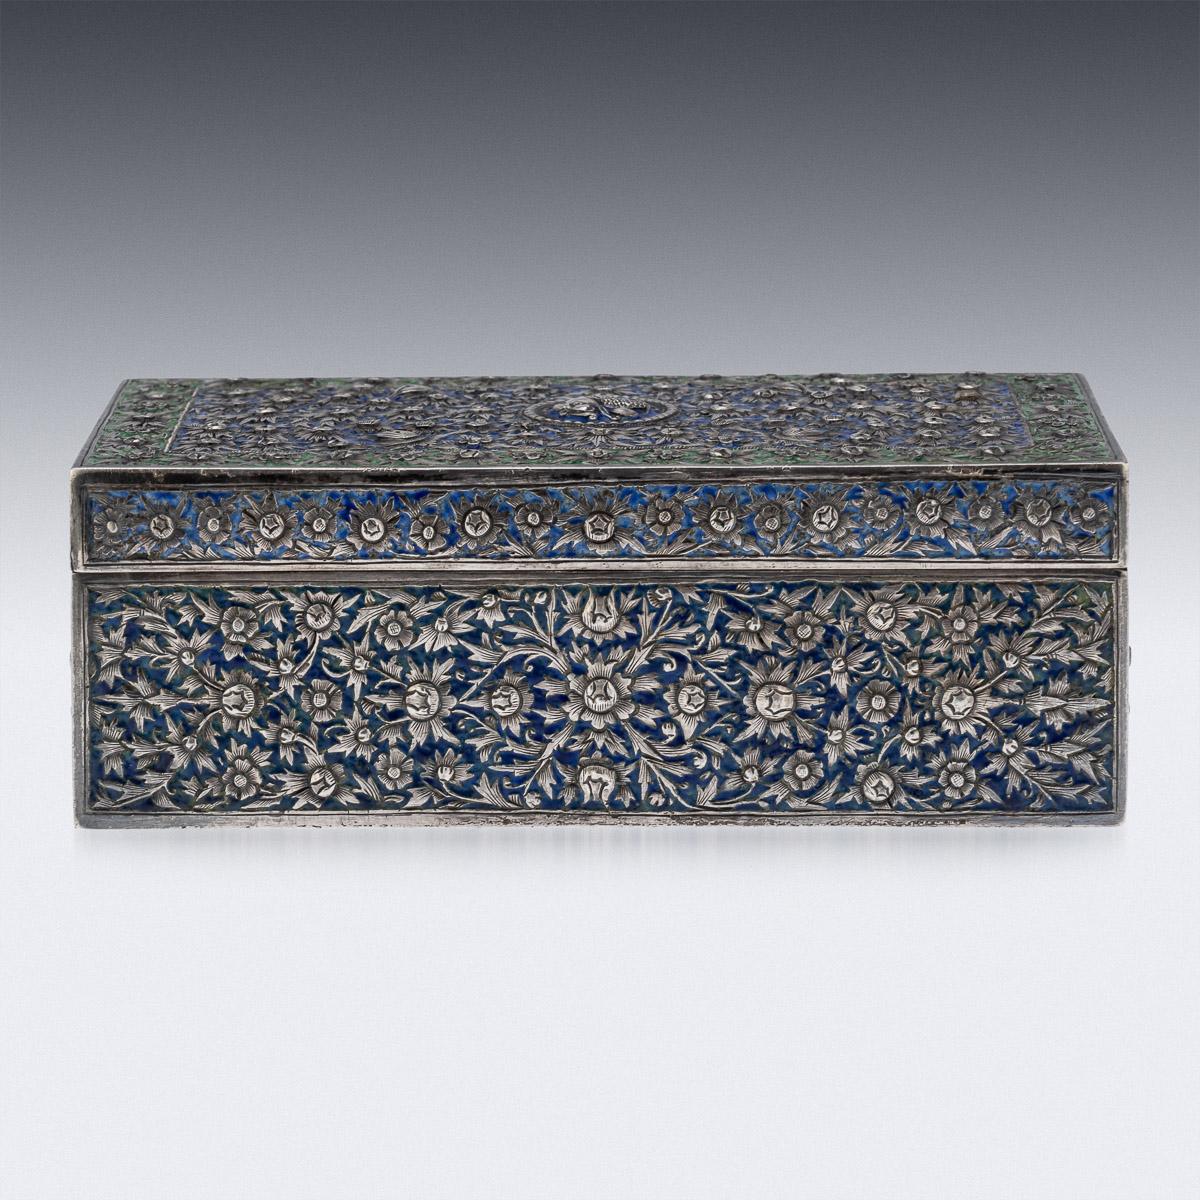 19th century Thai silver & enamel box, of traditional form, decorated throughout with stylized leaves and flowers on a dark blue and green enamelled ground. Hallmarked Chinese export silver mark (acid tested shows 900+), Maker's mark for Xiang